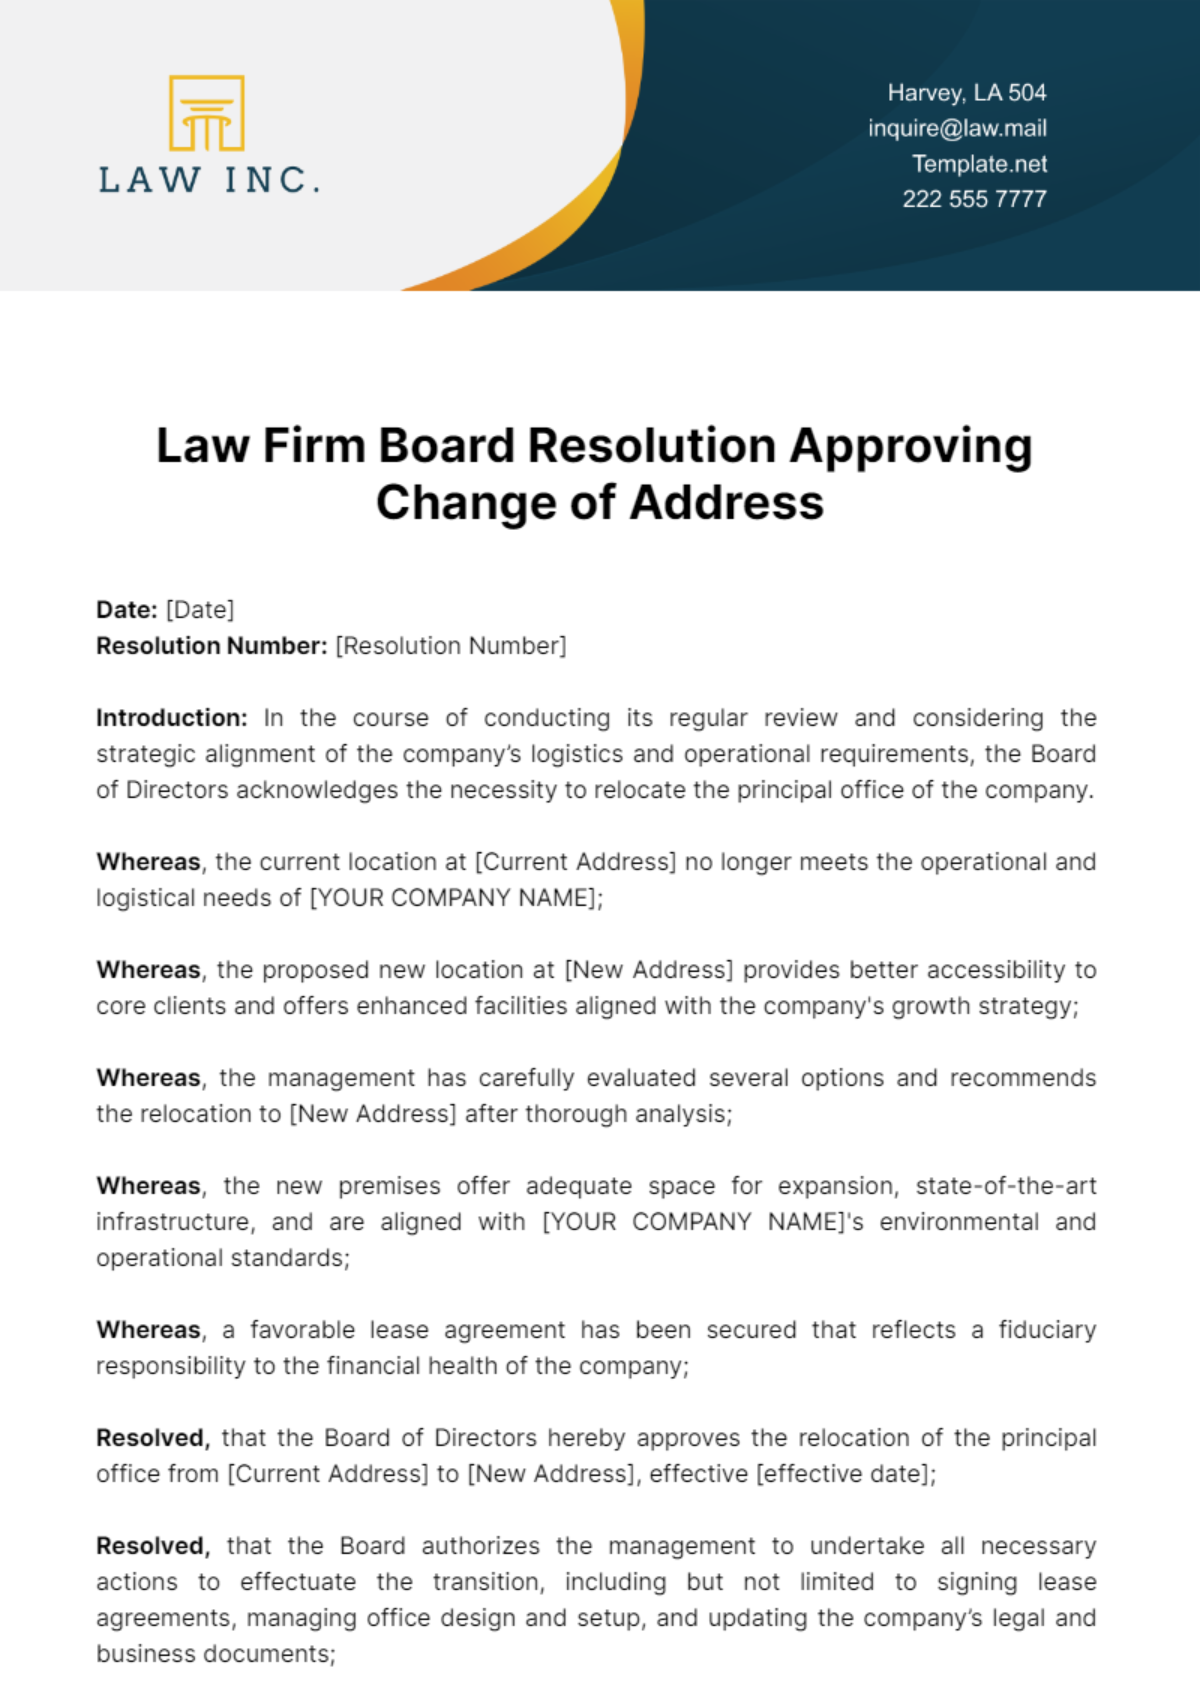 Law Firm Board Resolution Approving Change of Address Template